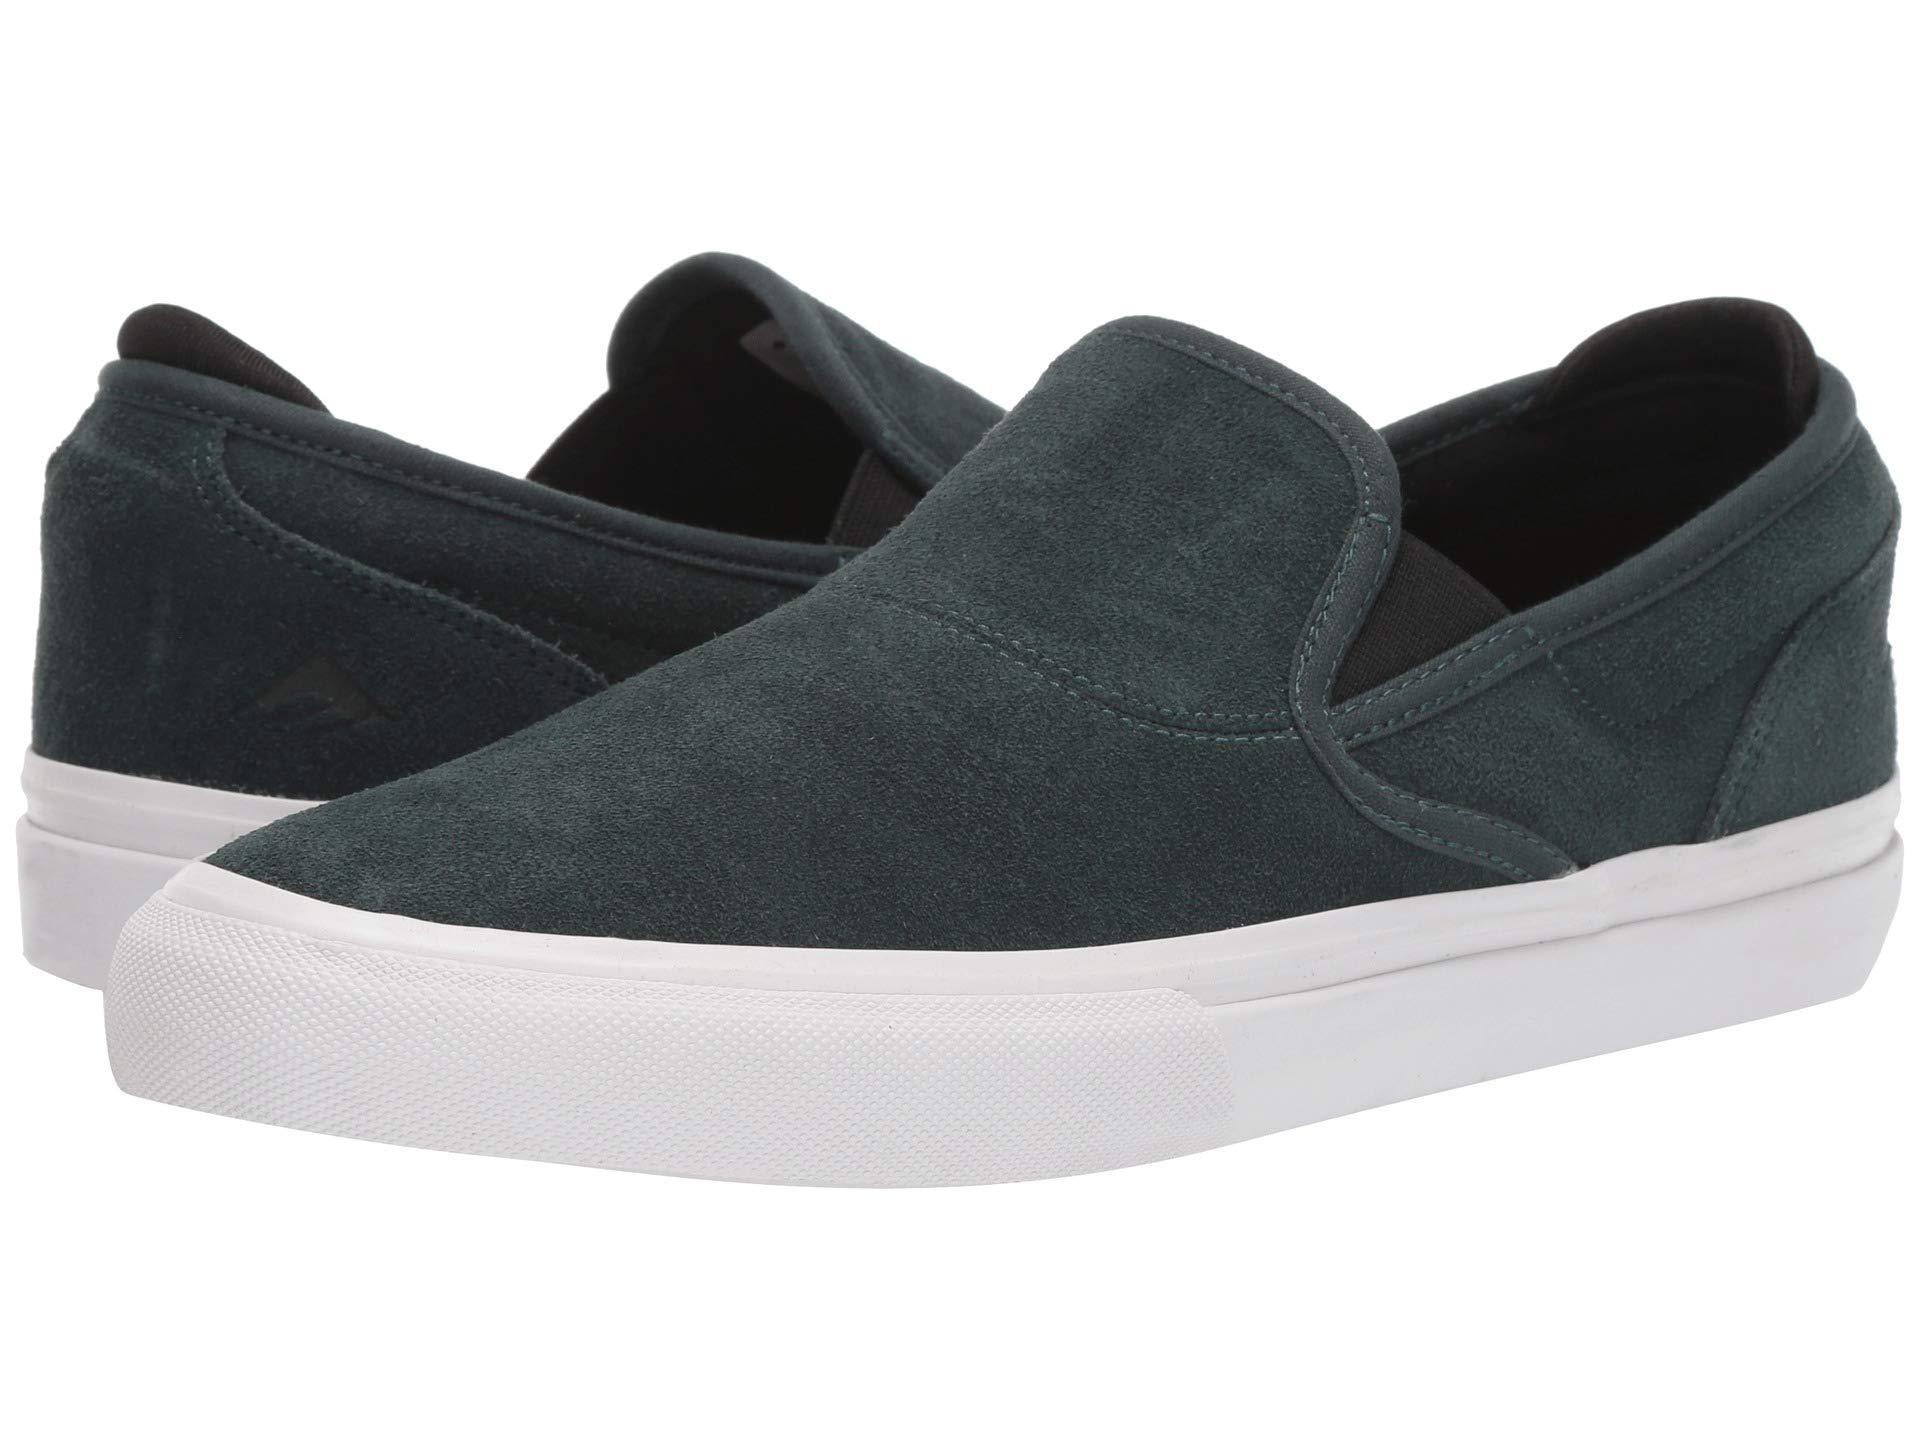 Emerica Suede Wino G6 Slip-on in Green for Men - Lyst